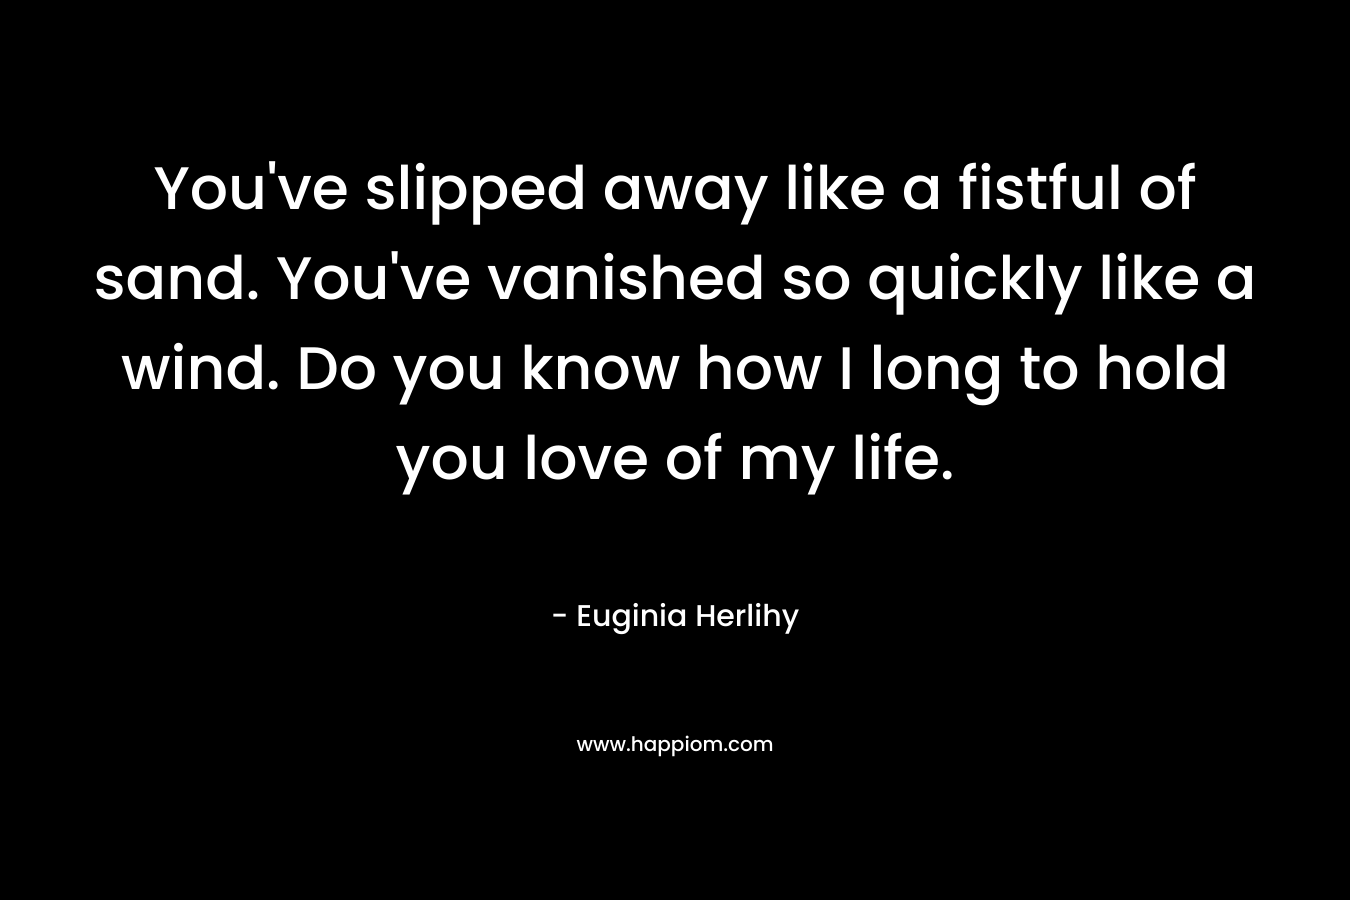 You’ve slipped away like a fistful of sand. You’ve vanished so quickly like a wind. Do you know how I long to hold you love of my life. – Euginia Herlihy